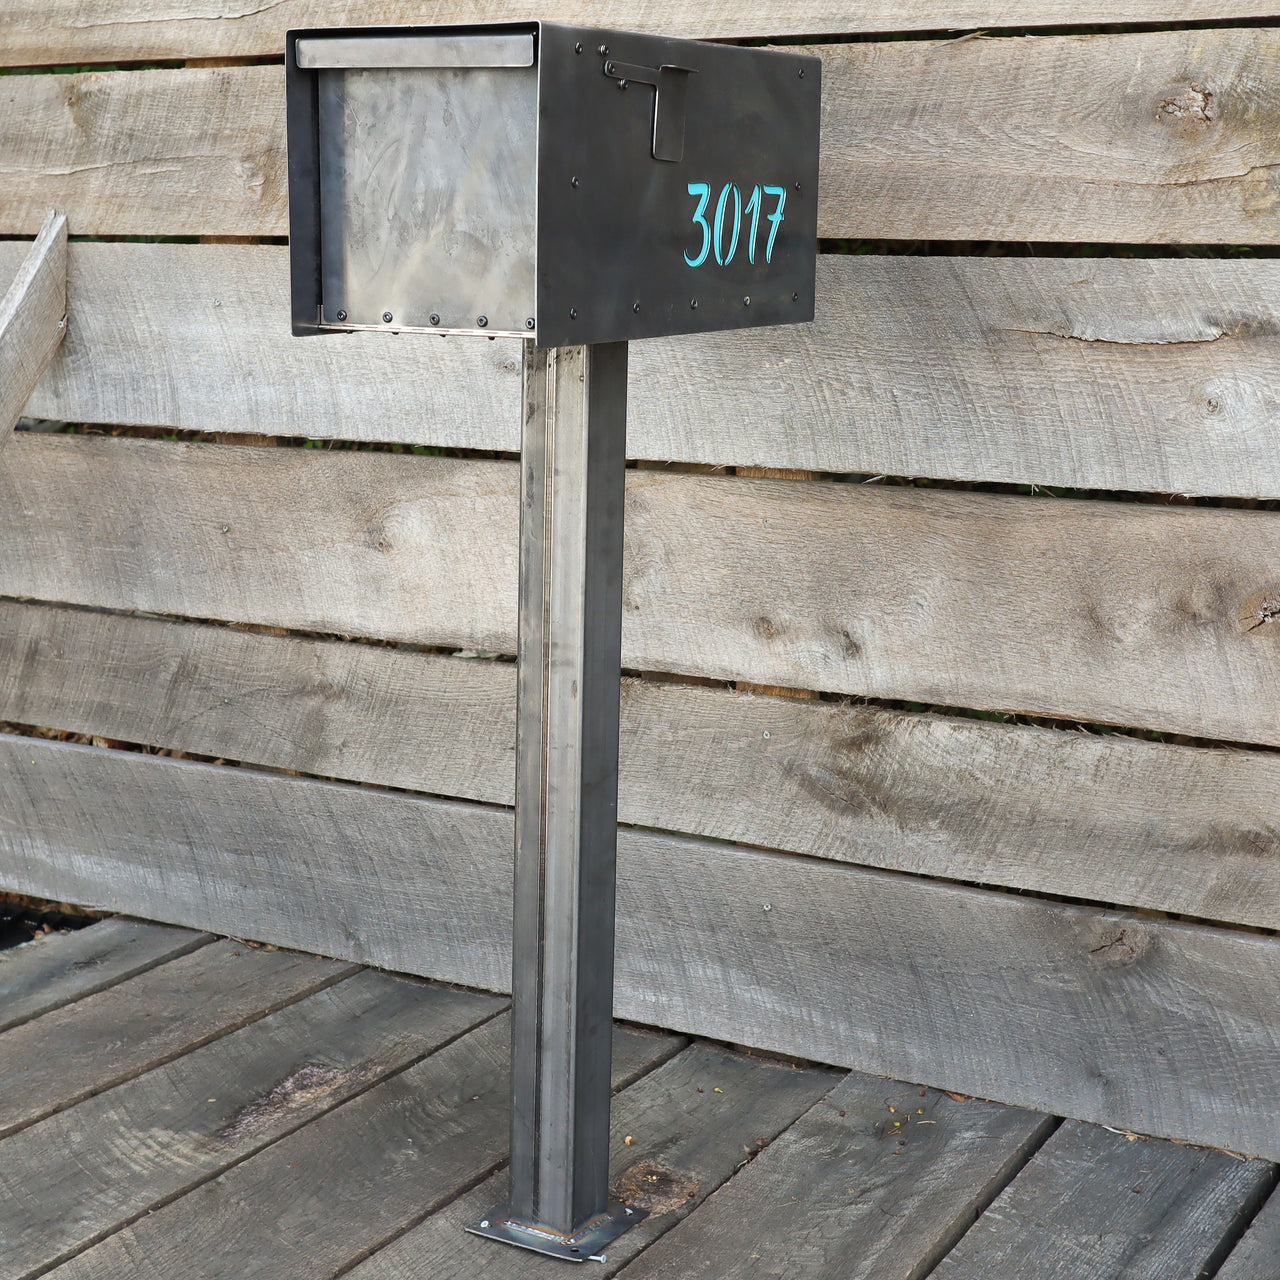 Custom Modern Steel Mailbox - Metal Address Mail Box with Personalized Numbers - Letter Box Post